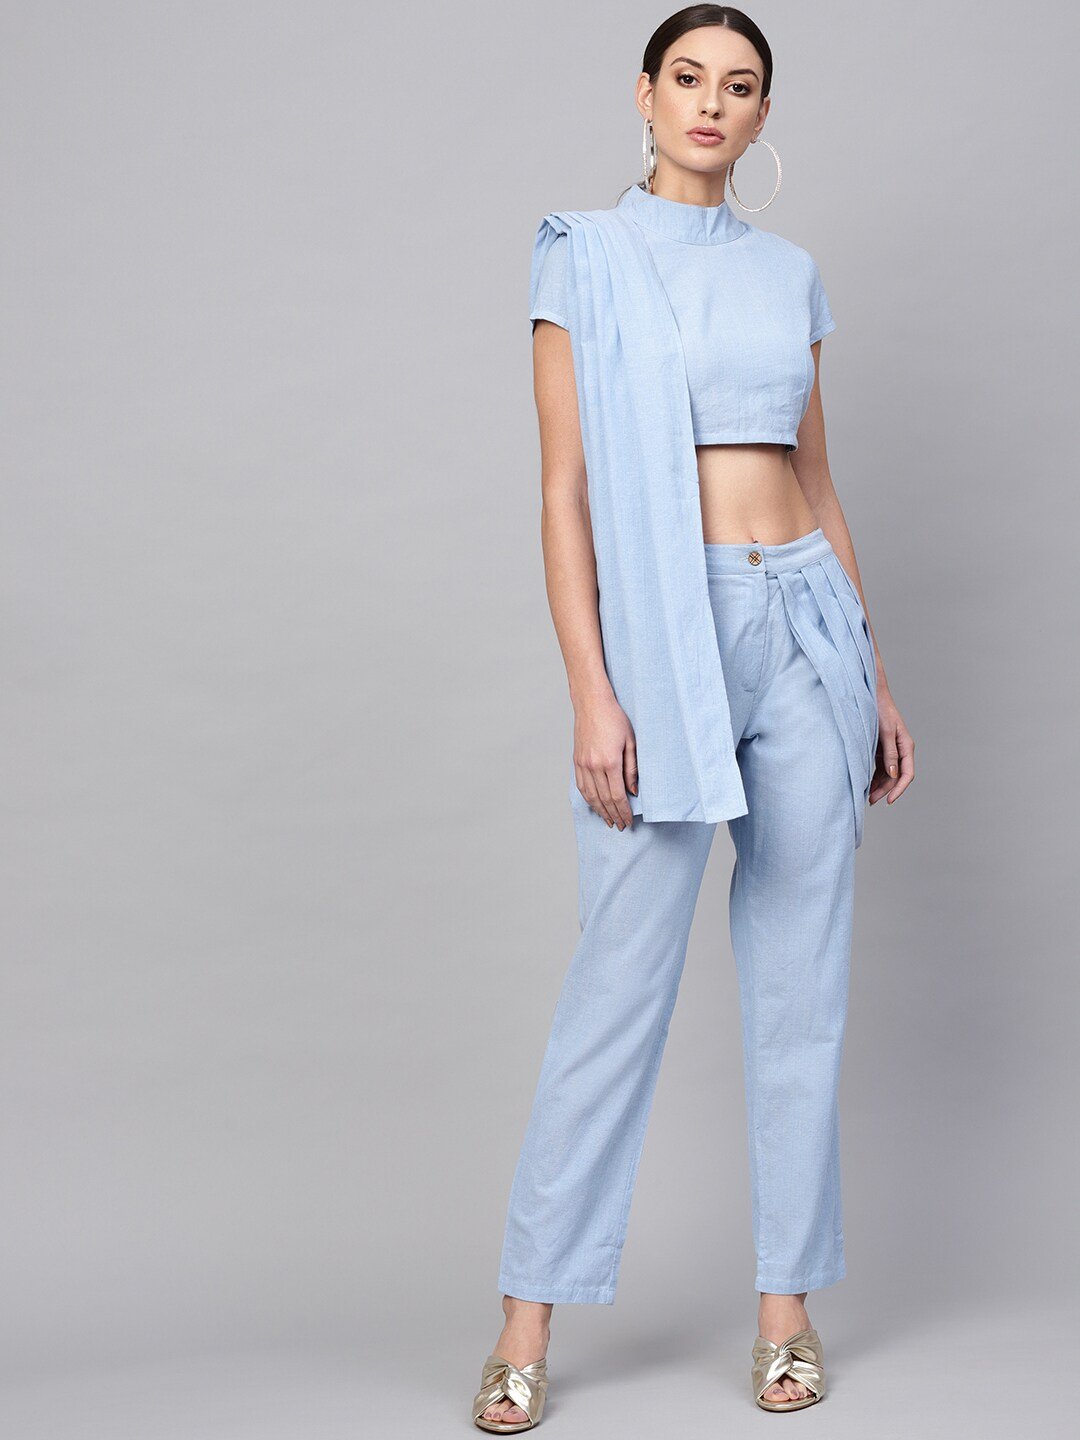 Women's  Solid Top with Trousers - AKS